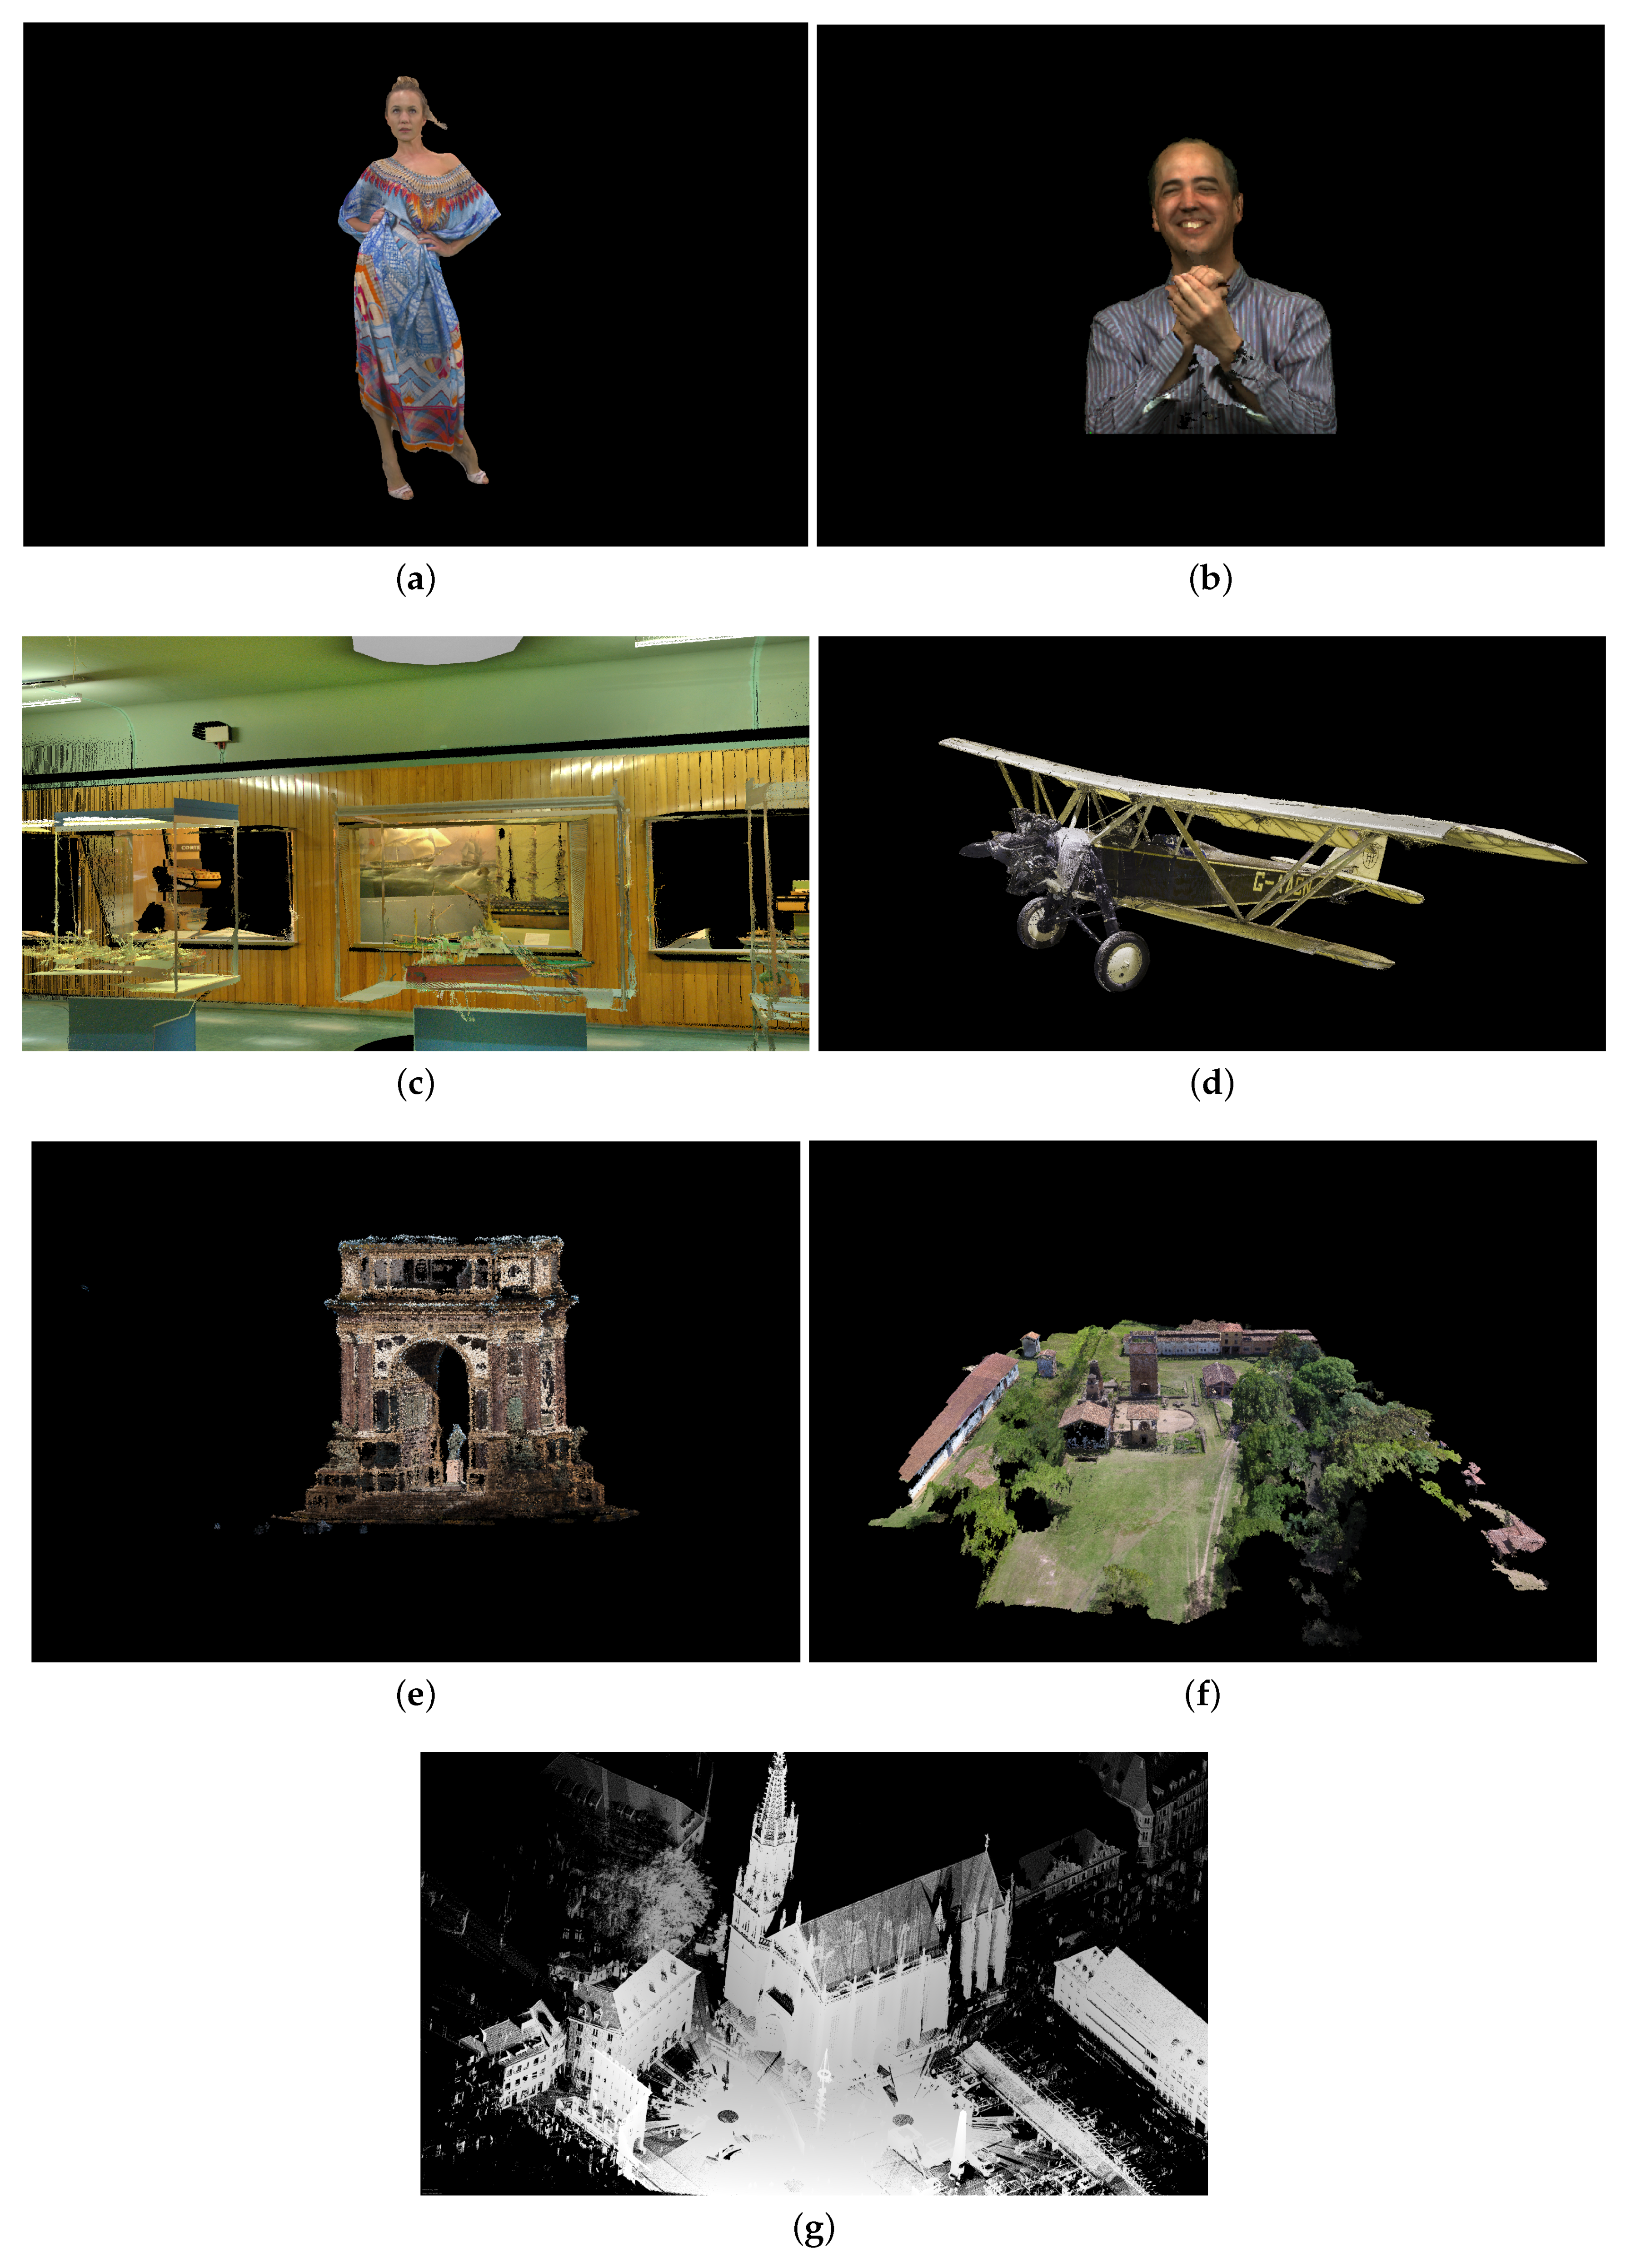 Symmetry | Free Full-Text | Point Cloud Coding Solutions, Subjective  Assessment and Objective Measures: A Case Study | HTML